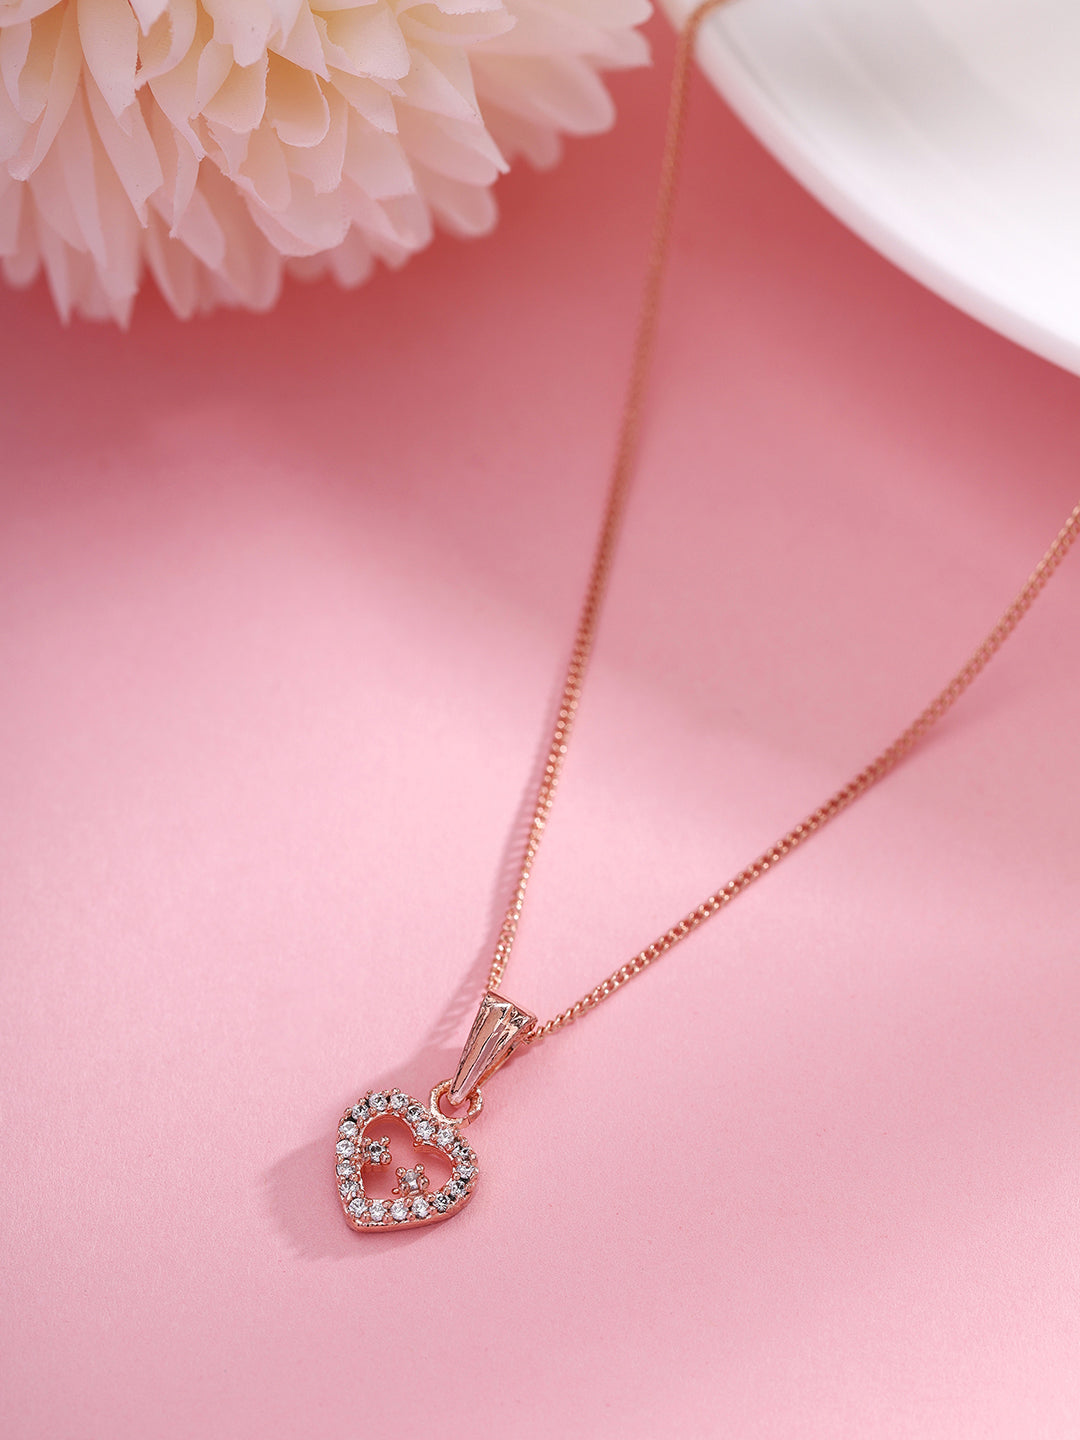 Priyaasi Romantic Rose Gold-Plated Heart Pendant Necklace